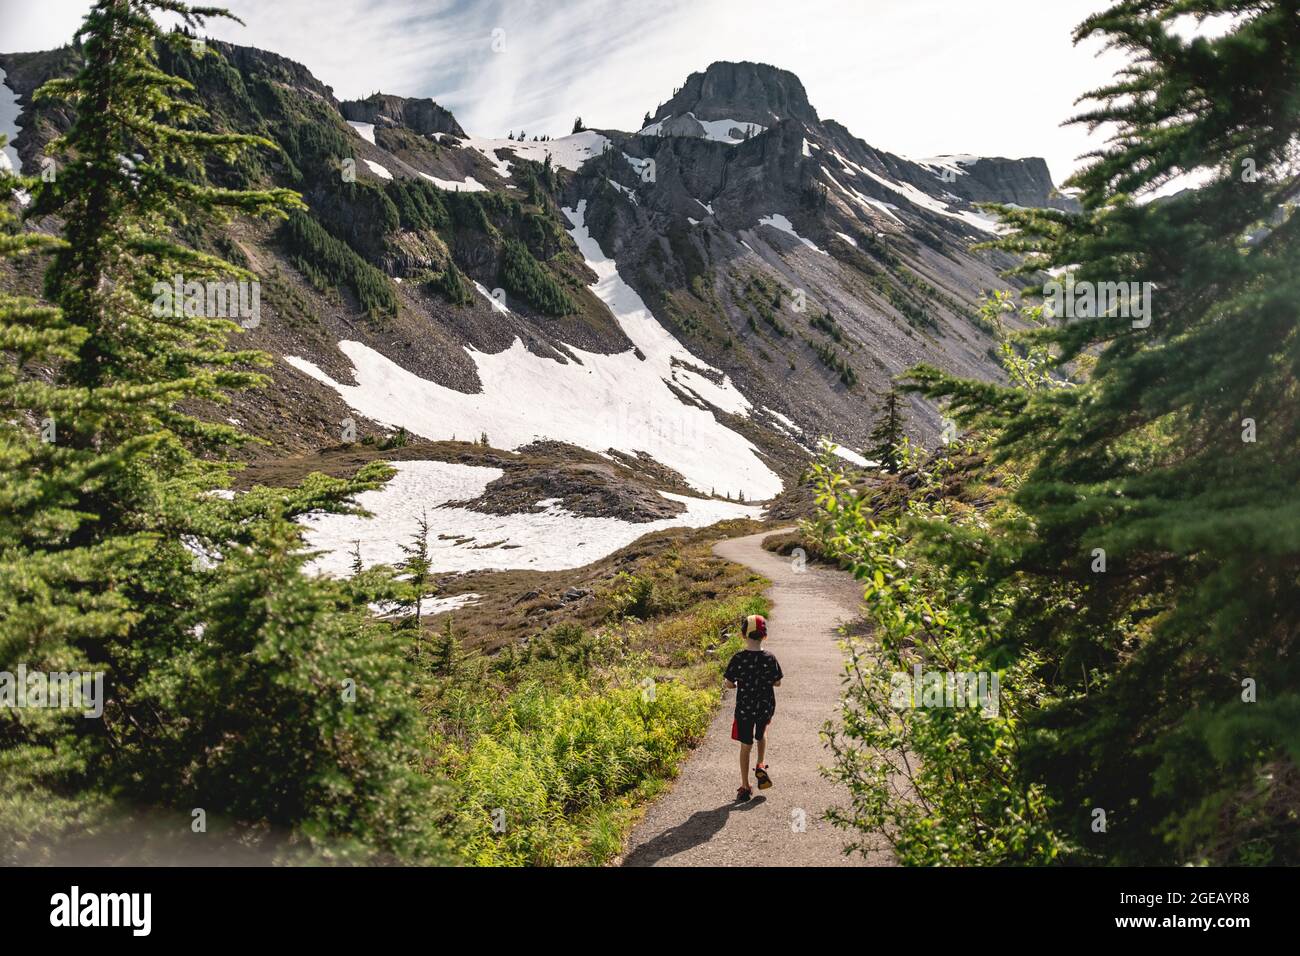 Young boy hiking at Heather Meadows in the Mt. Baker-Snoqualmie National Forest. Stock Photo